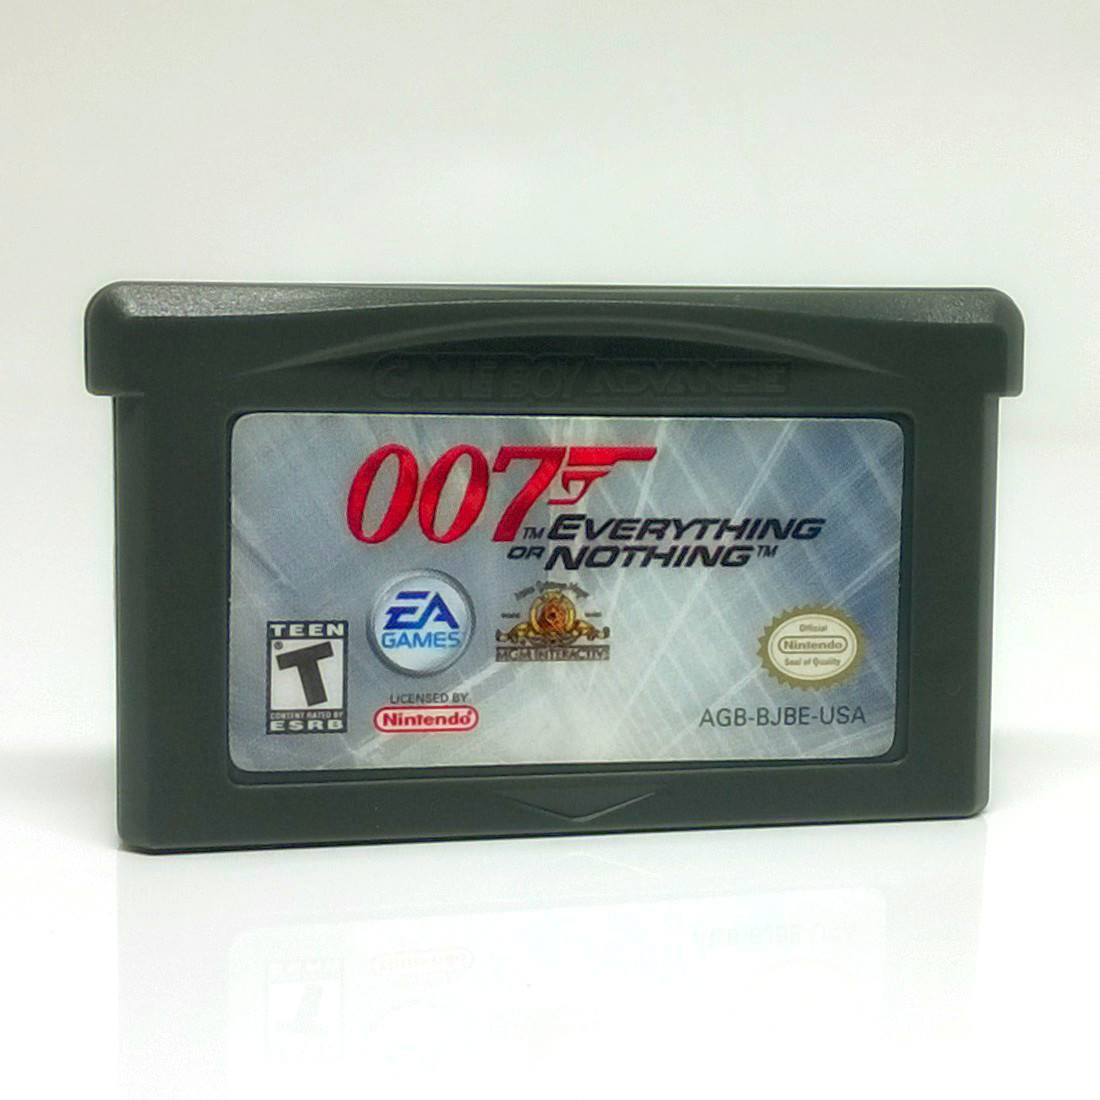 007: Everything or Nothing Nintendo GBA Game Boy Advance Game